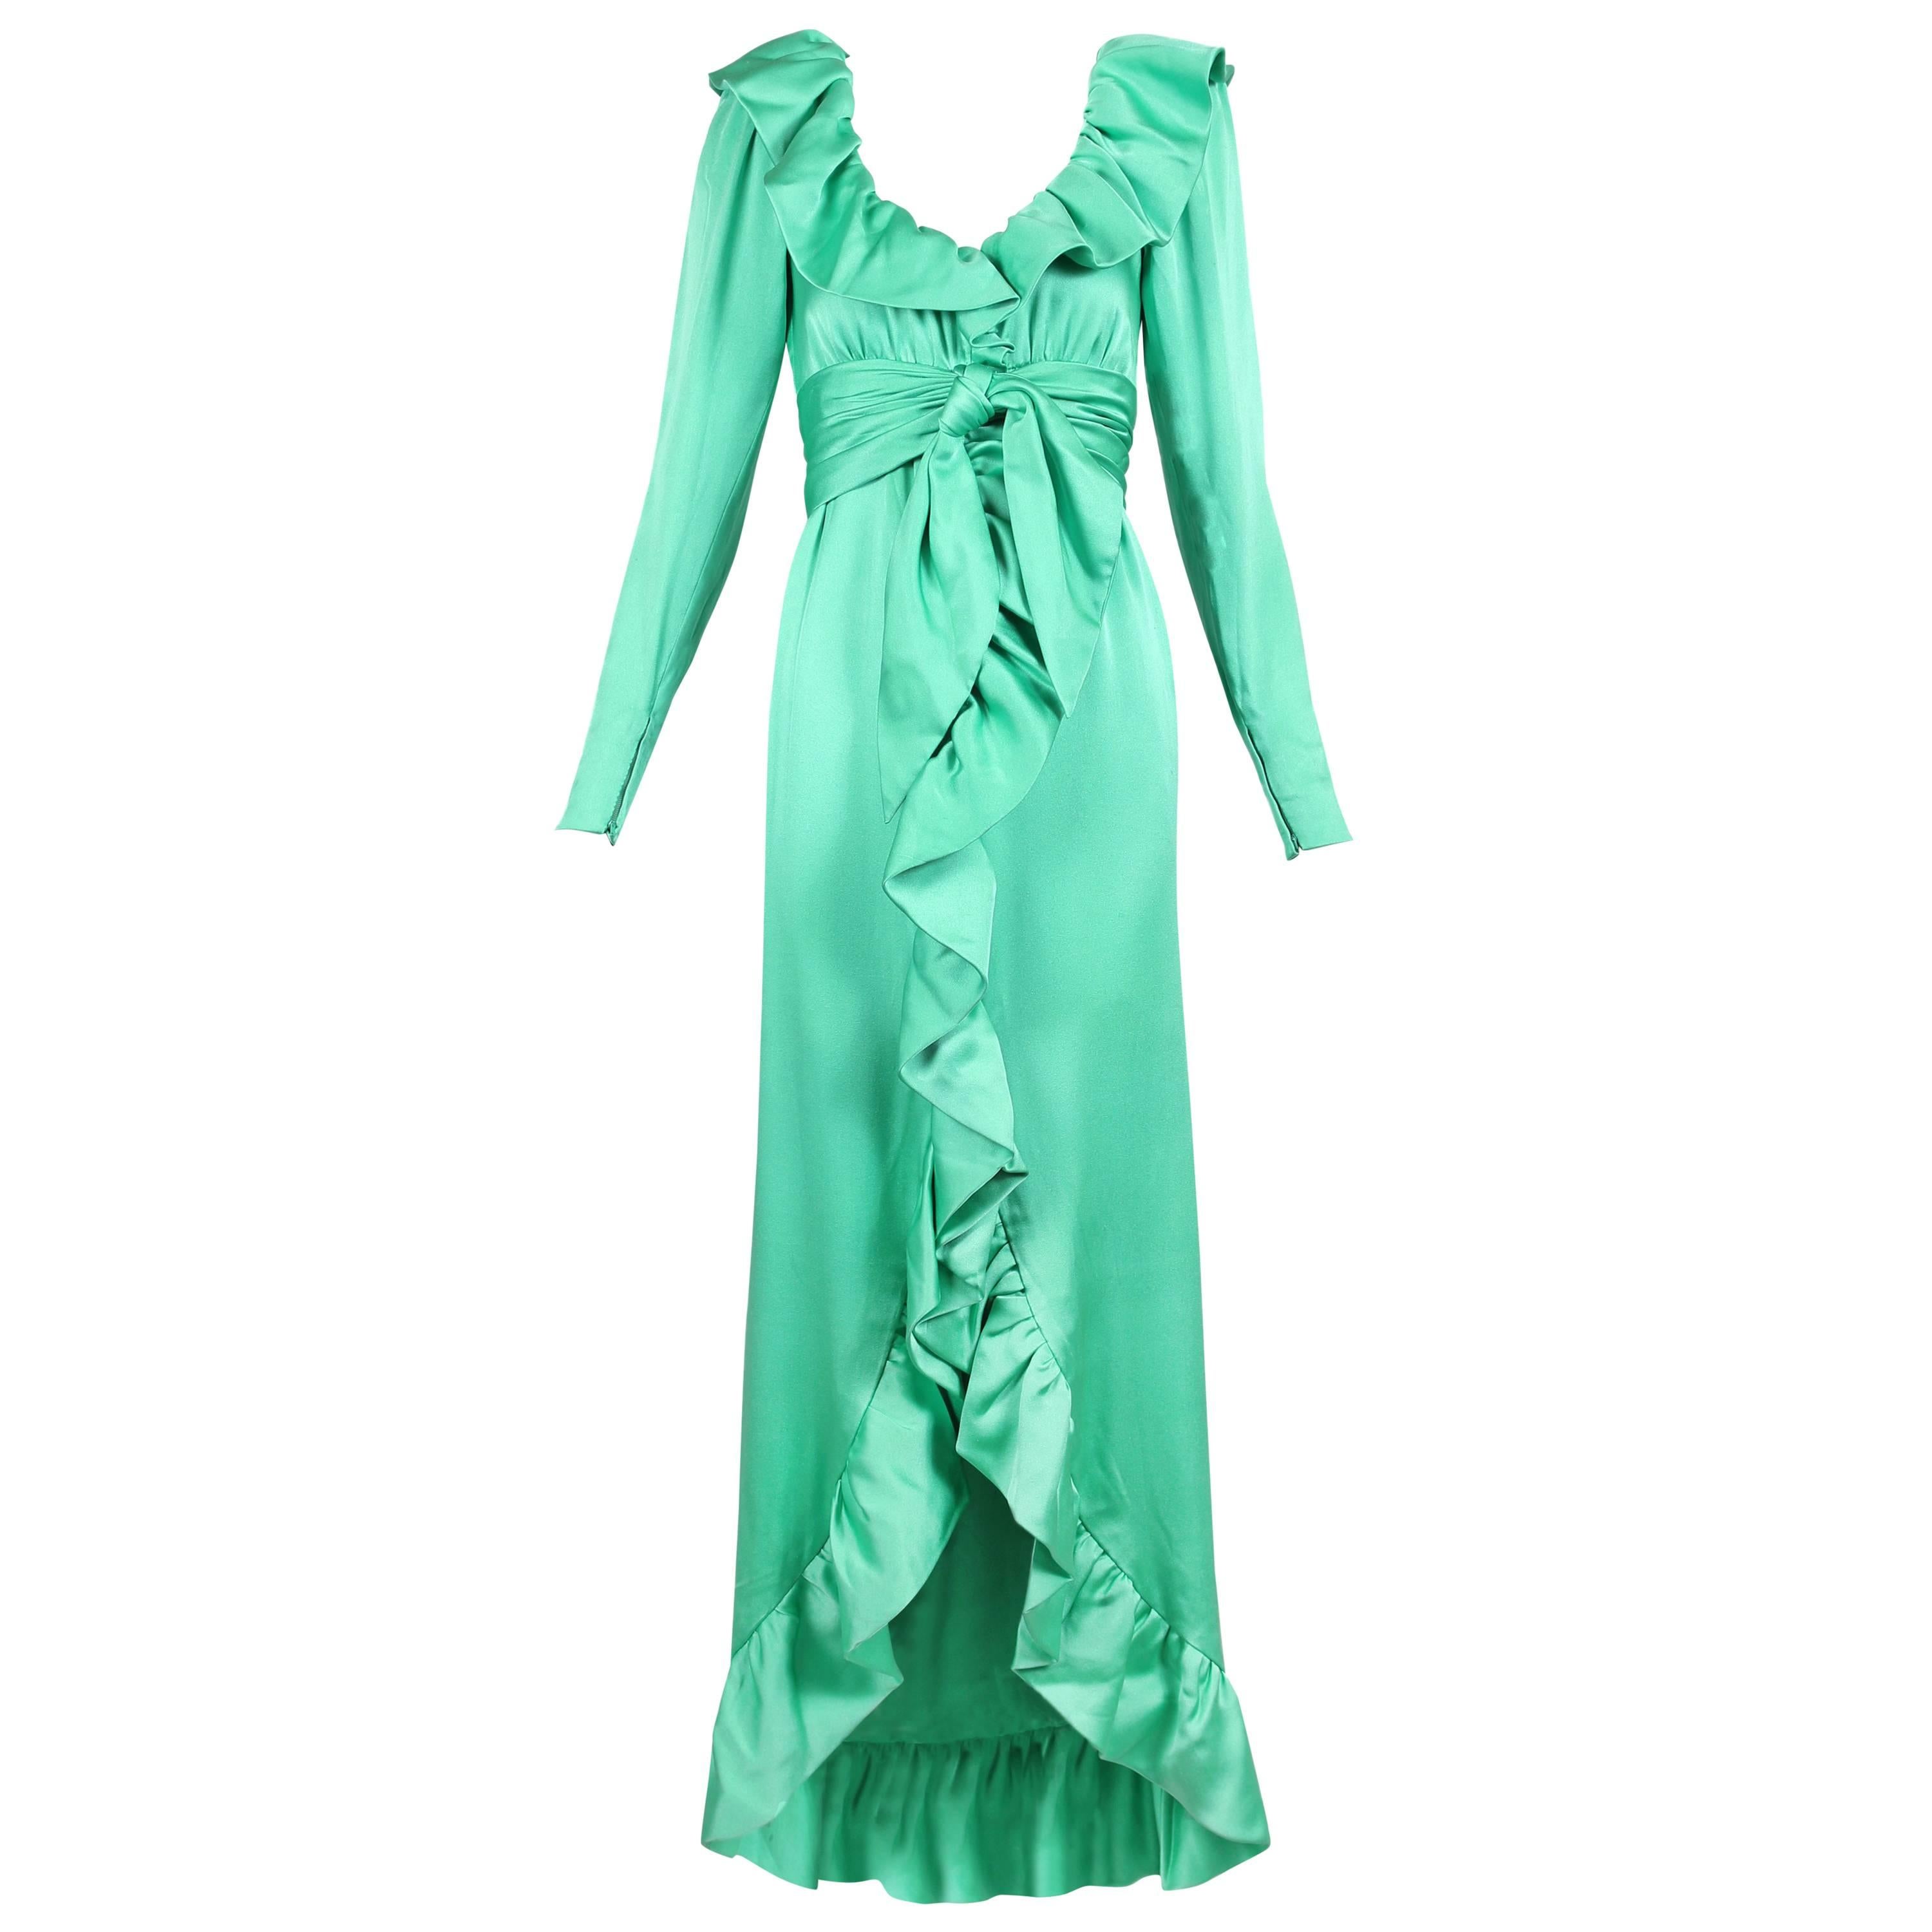 Givenchy Haute Couture Sea Foam Green Silk Gown With Ruffle Neckline No 70369